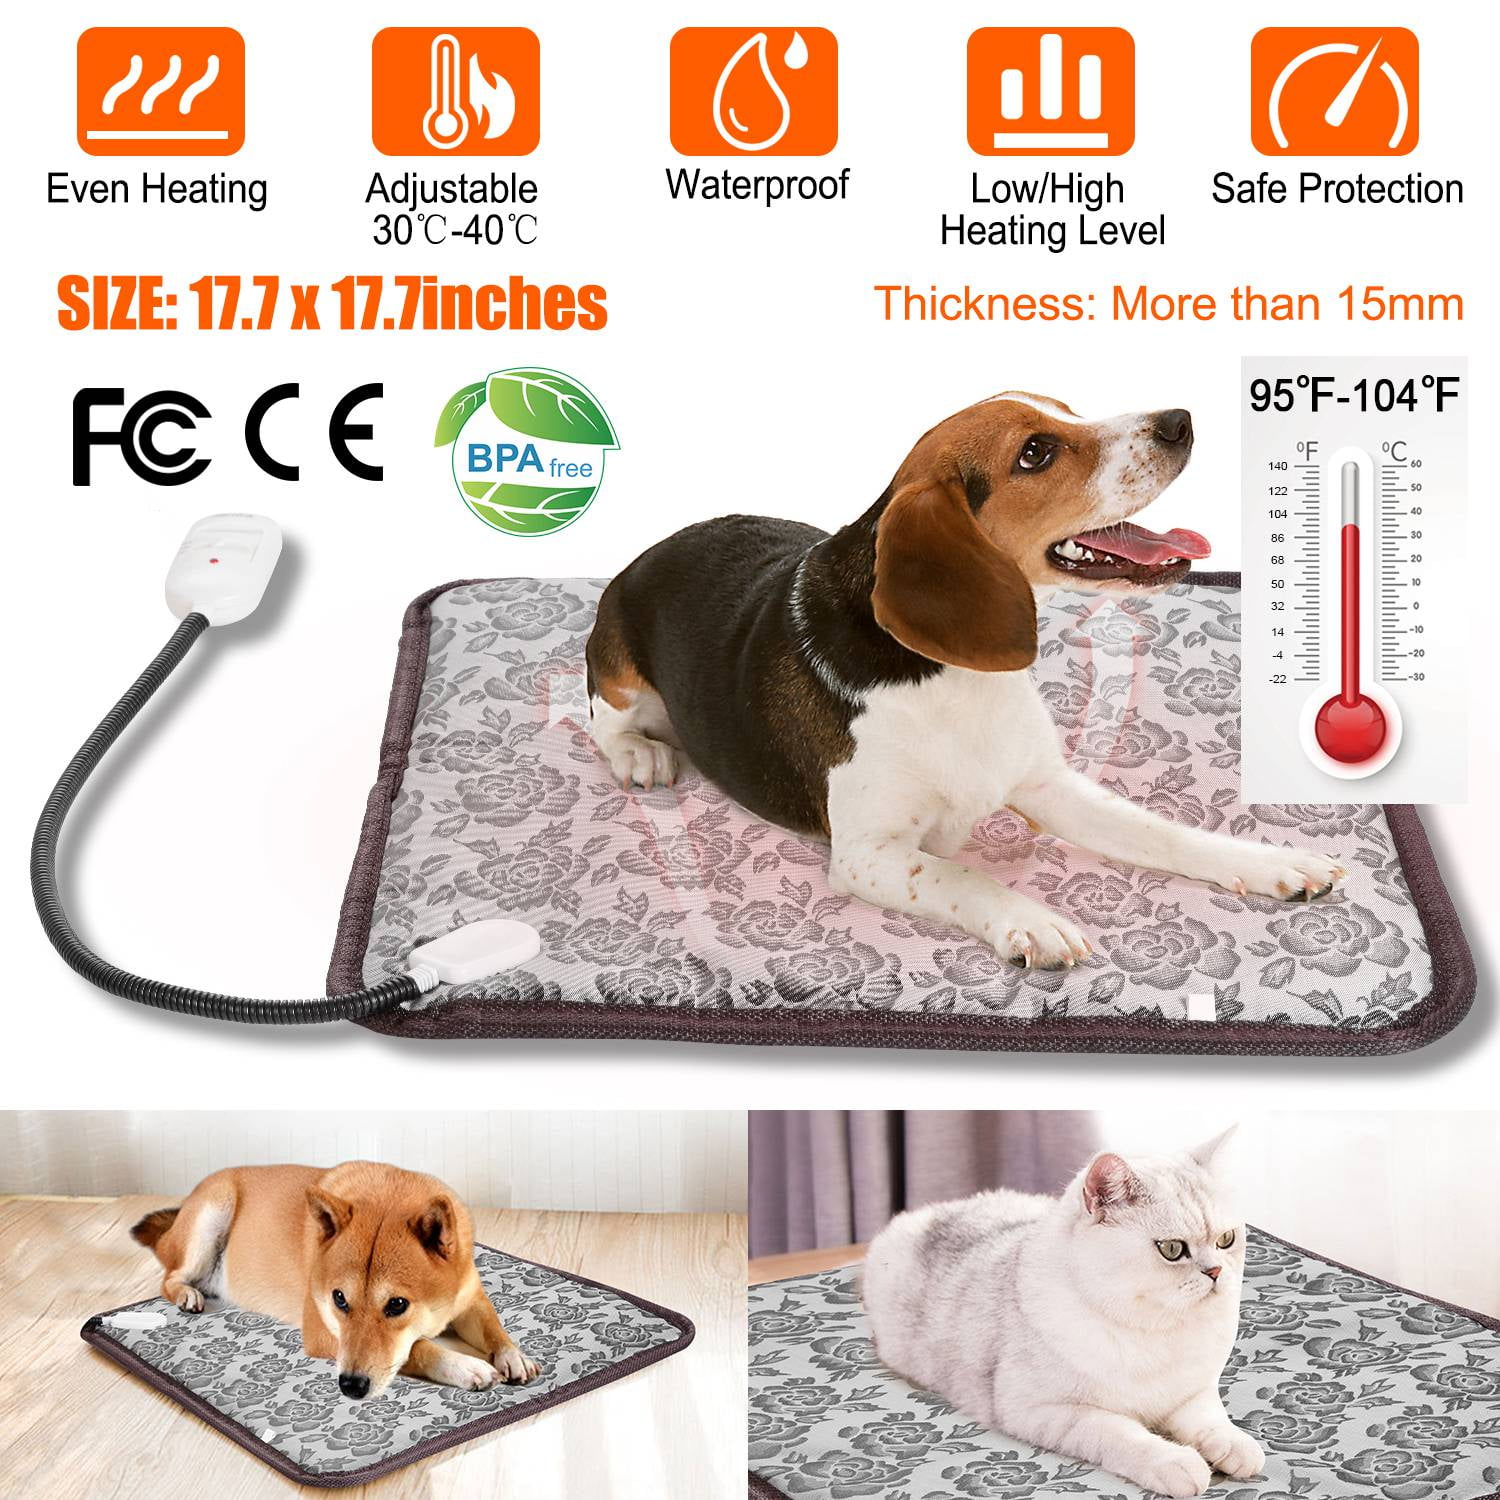 Pet Bed: Chill Pads for Dogs or Cats, from P.L.A.Y.